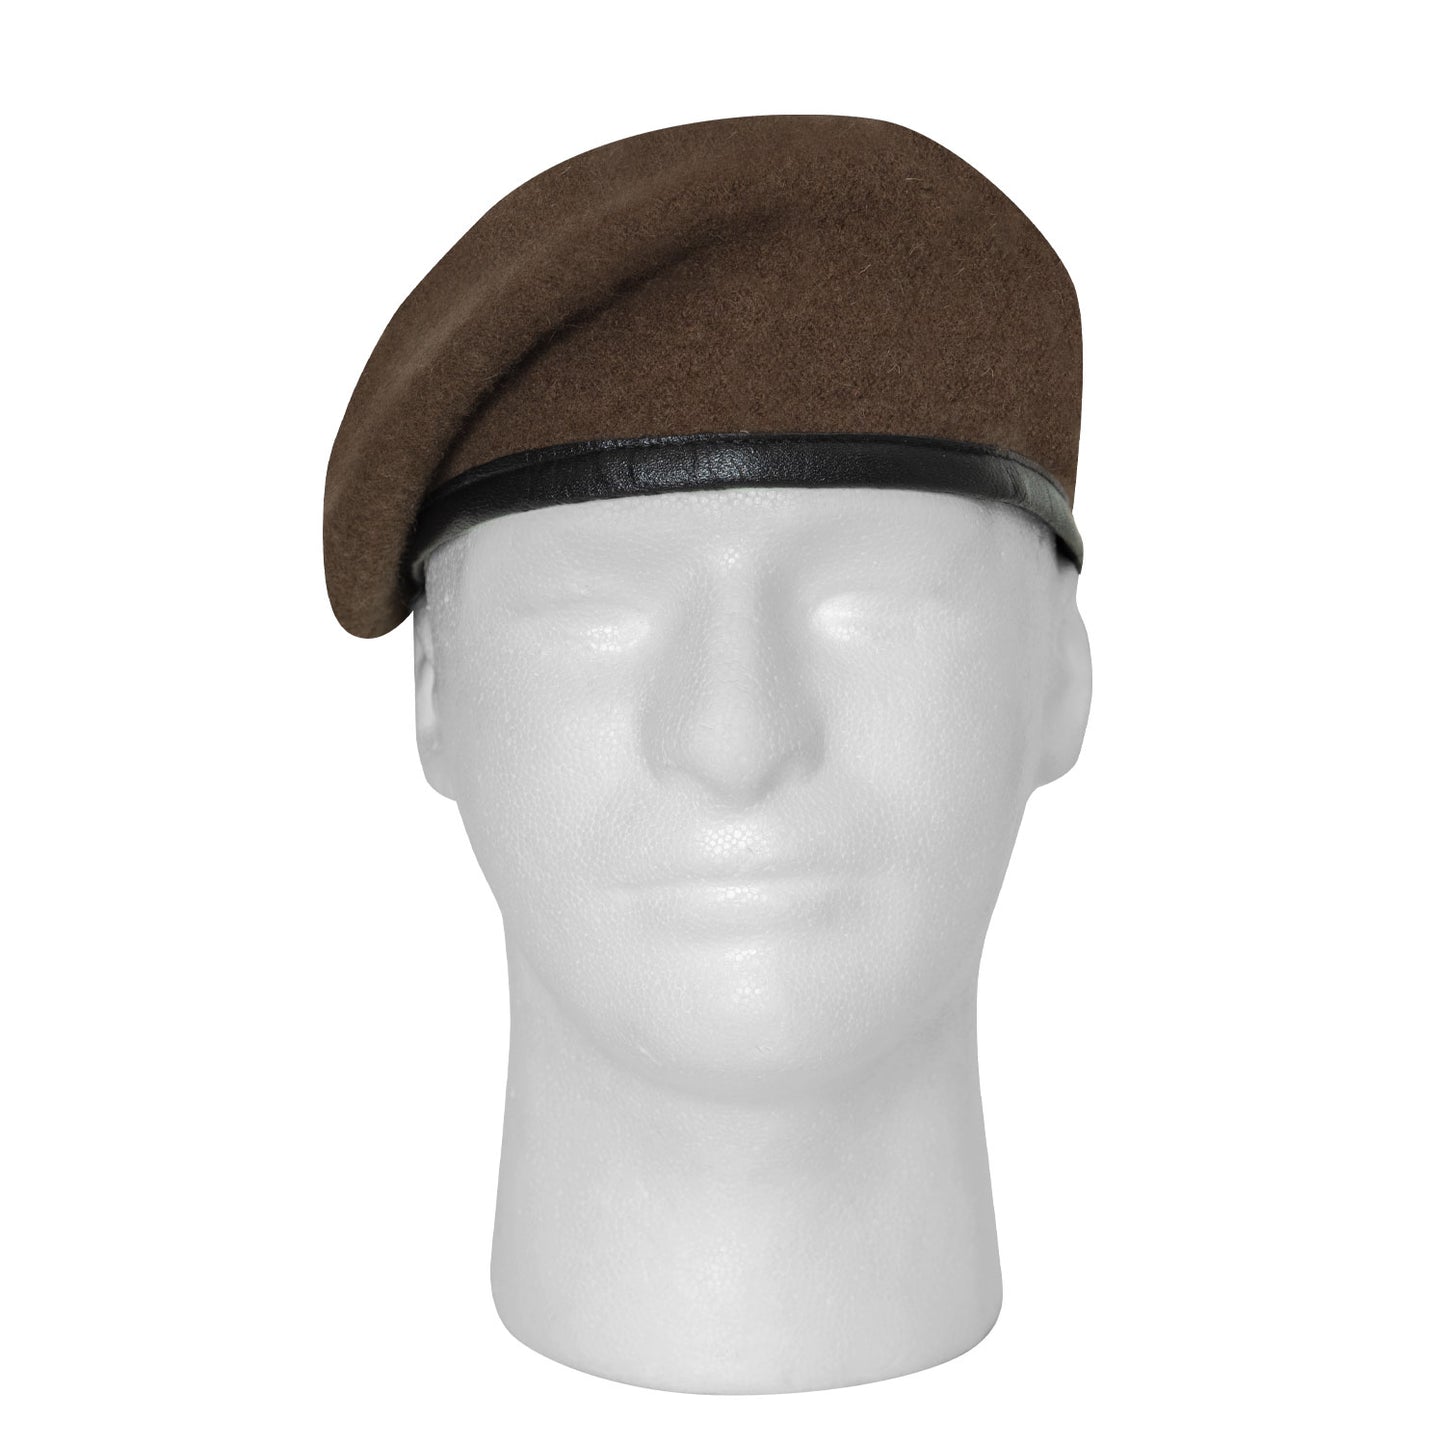 Rothco G.I. Type Inspection Ready Beret 6½-7¾ - Made to Mil Spec